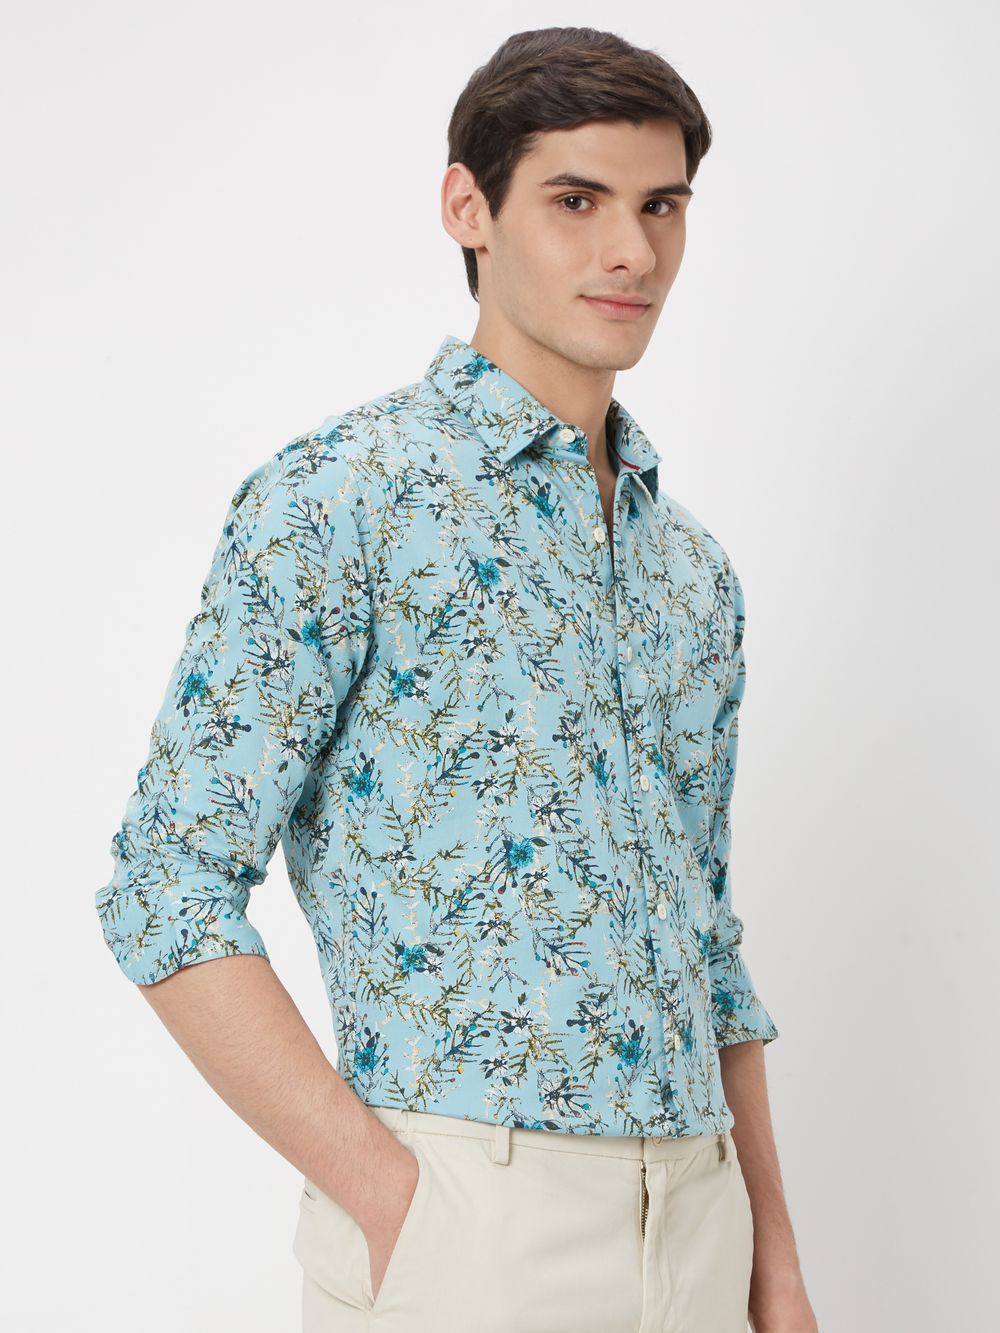 Turquoise & Multi Floral Print Slim Fit Casual Shirt